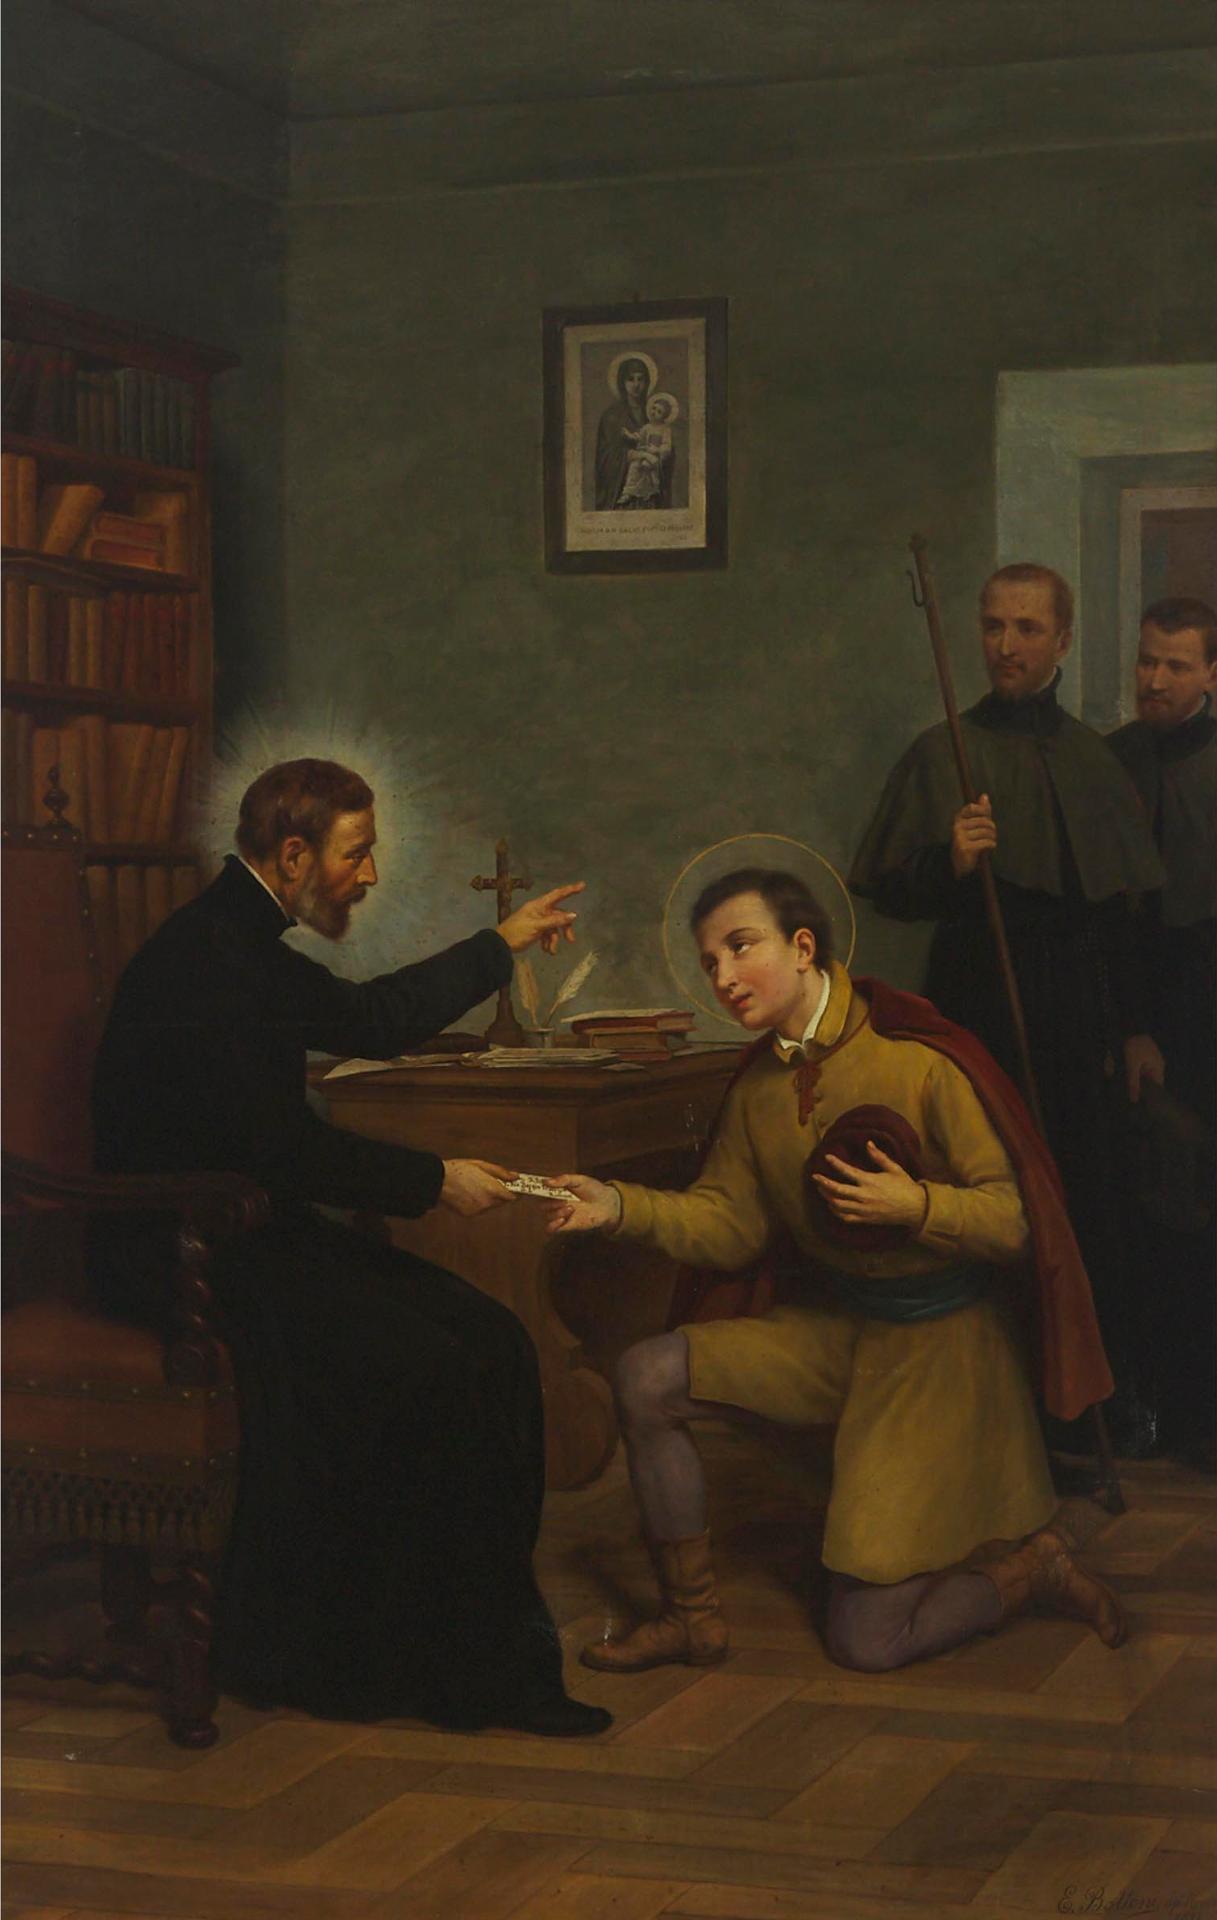 E. Bottoni - The Education Of The Young Clergyman, 1897